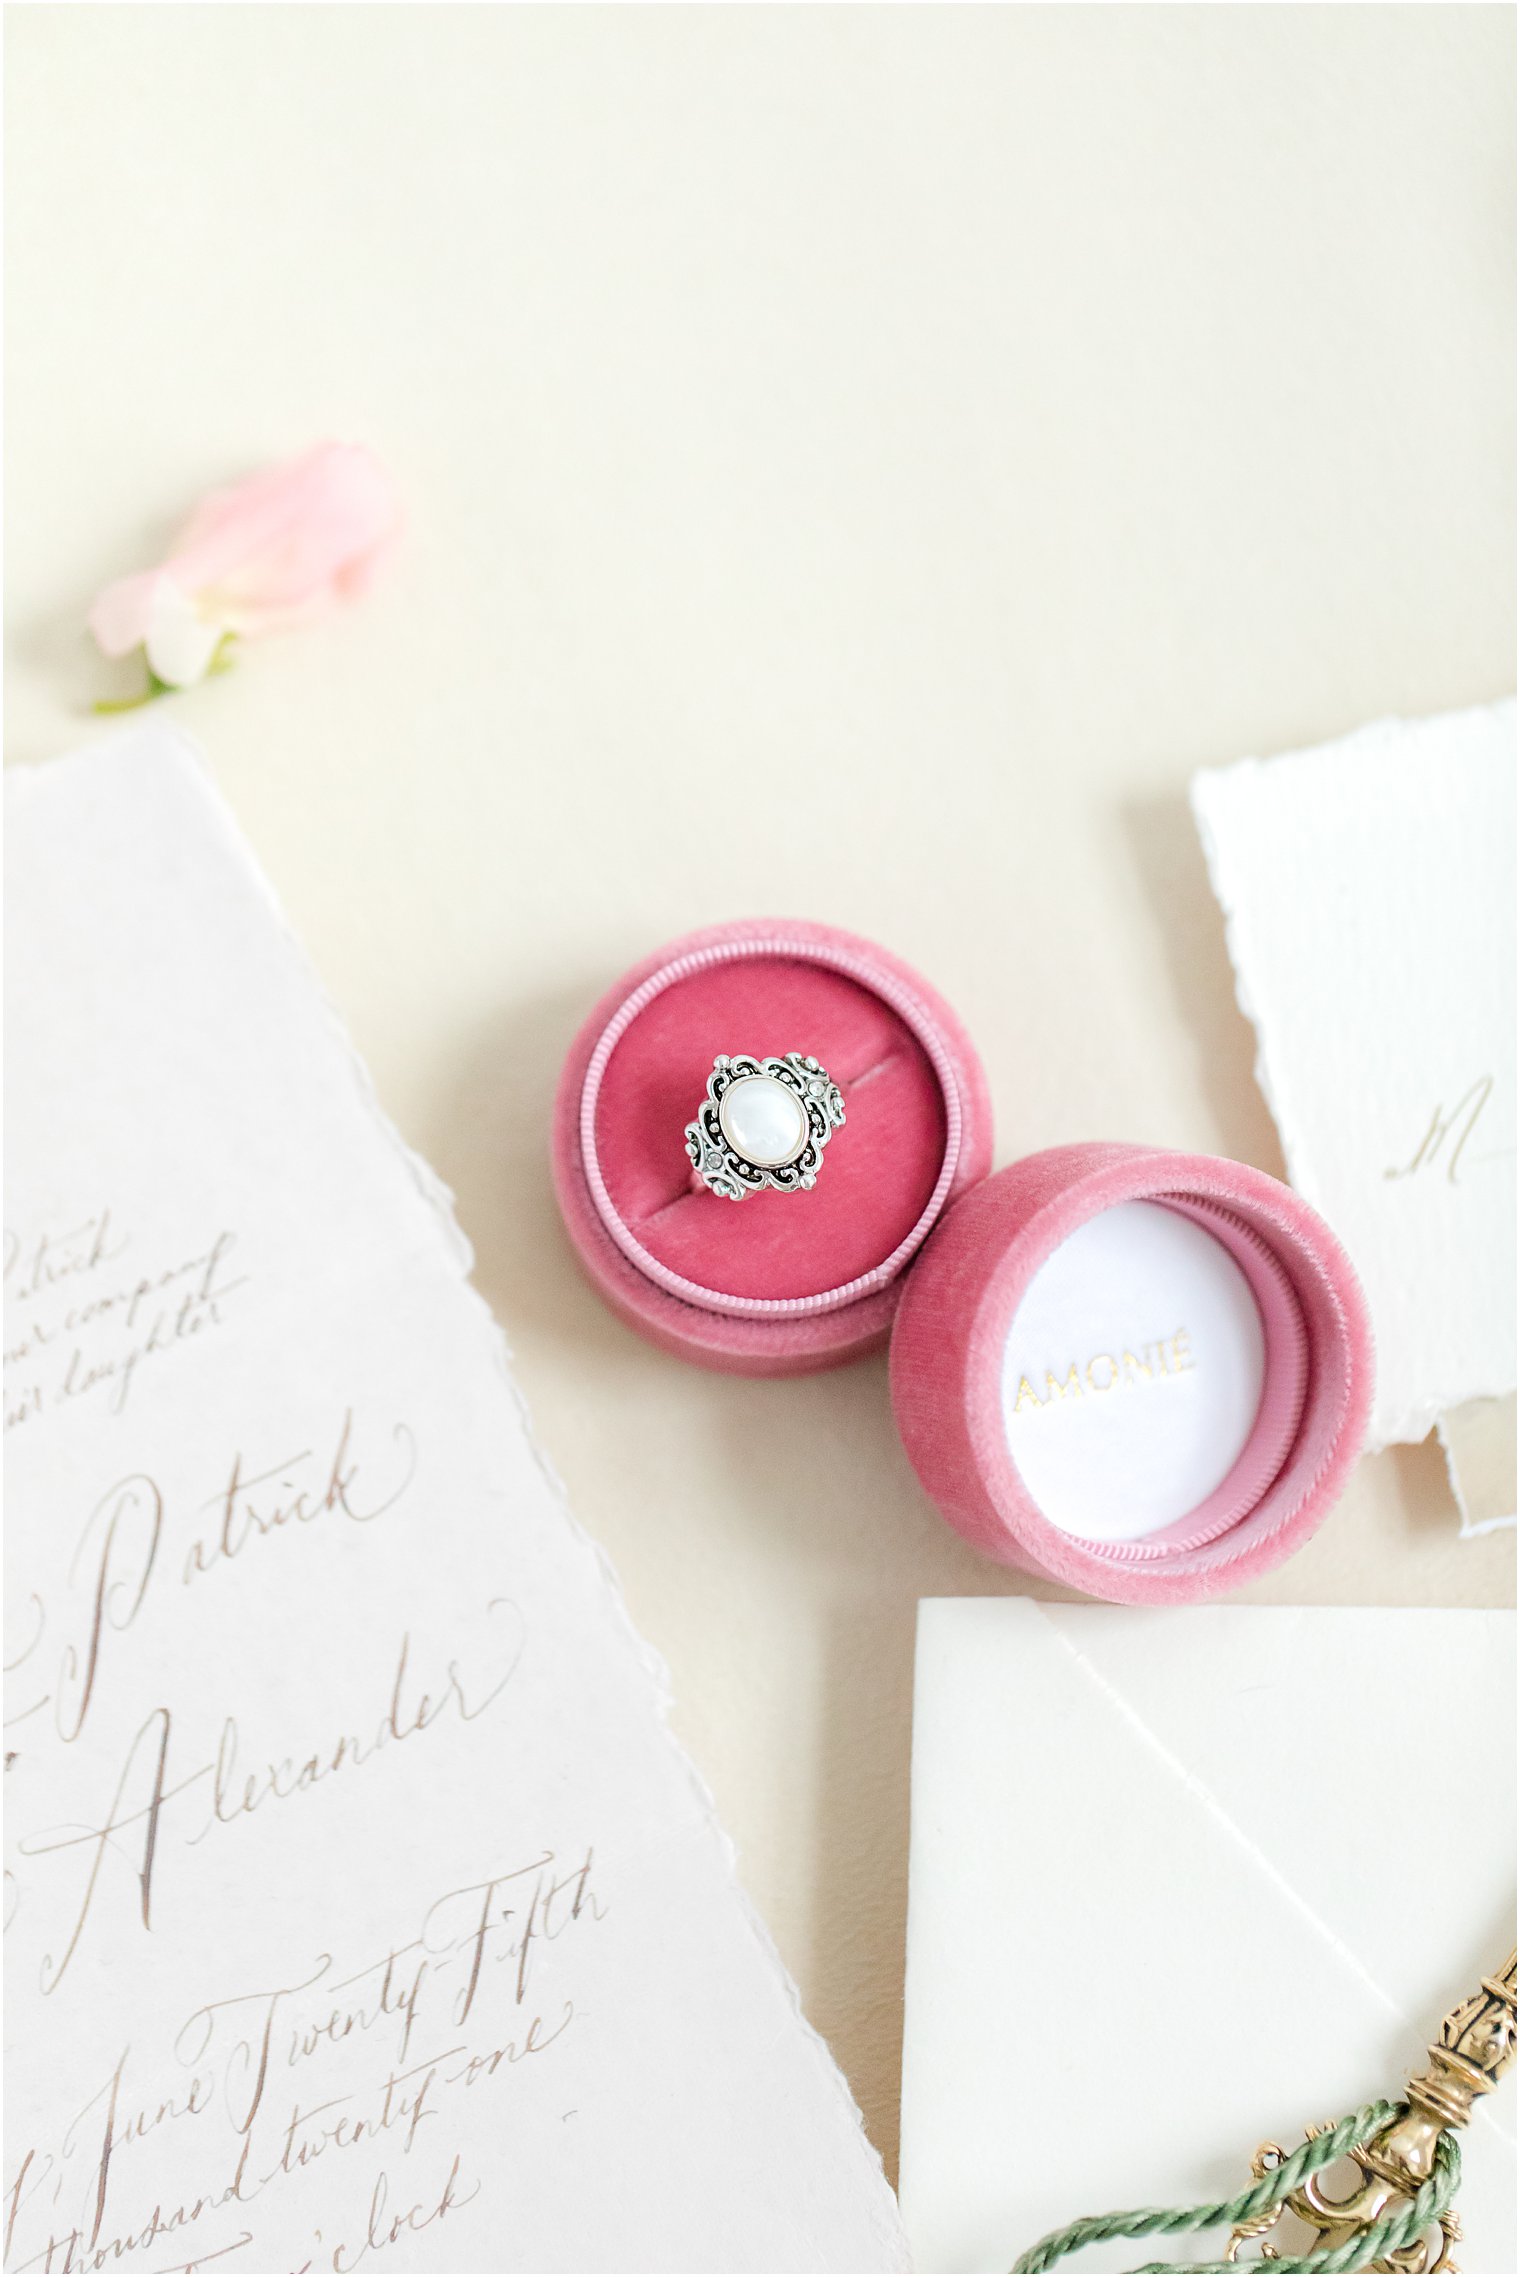 White stone engagement ring in pink ring box by Amonie